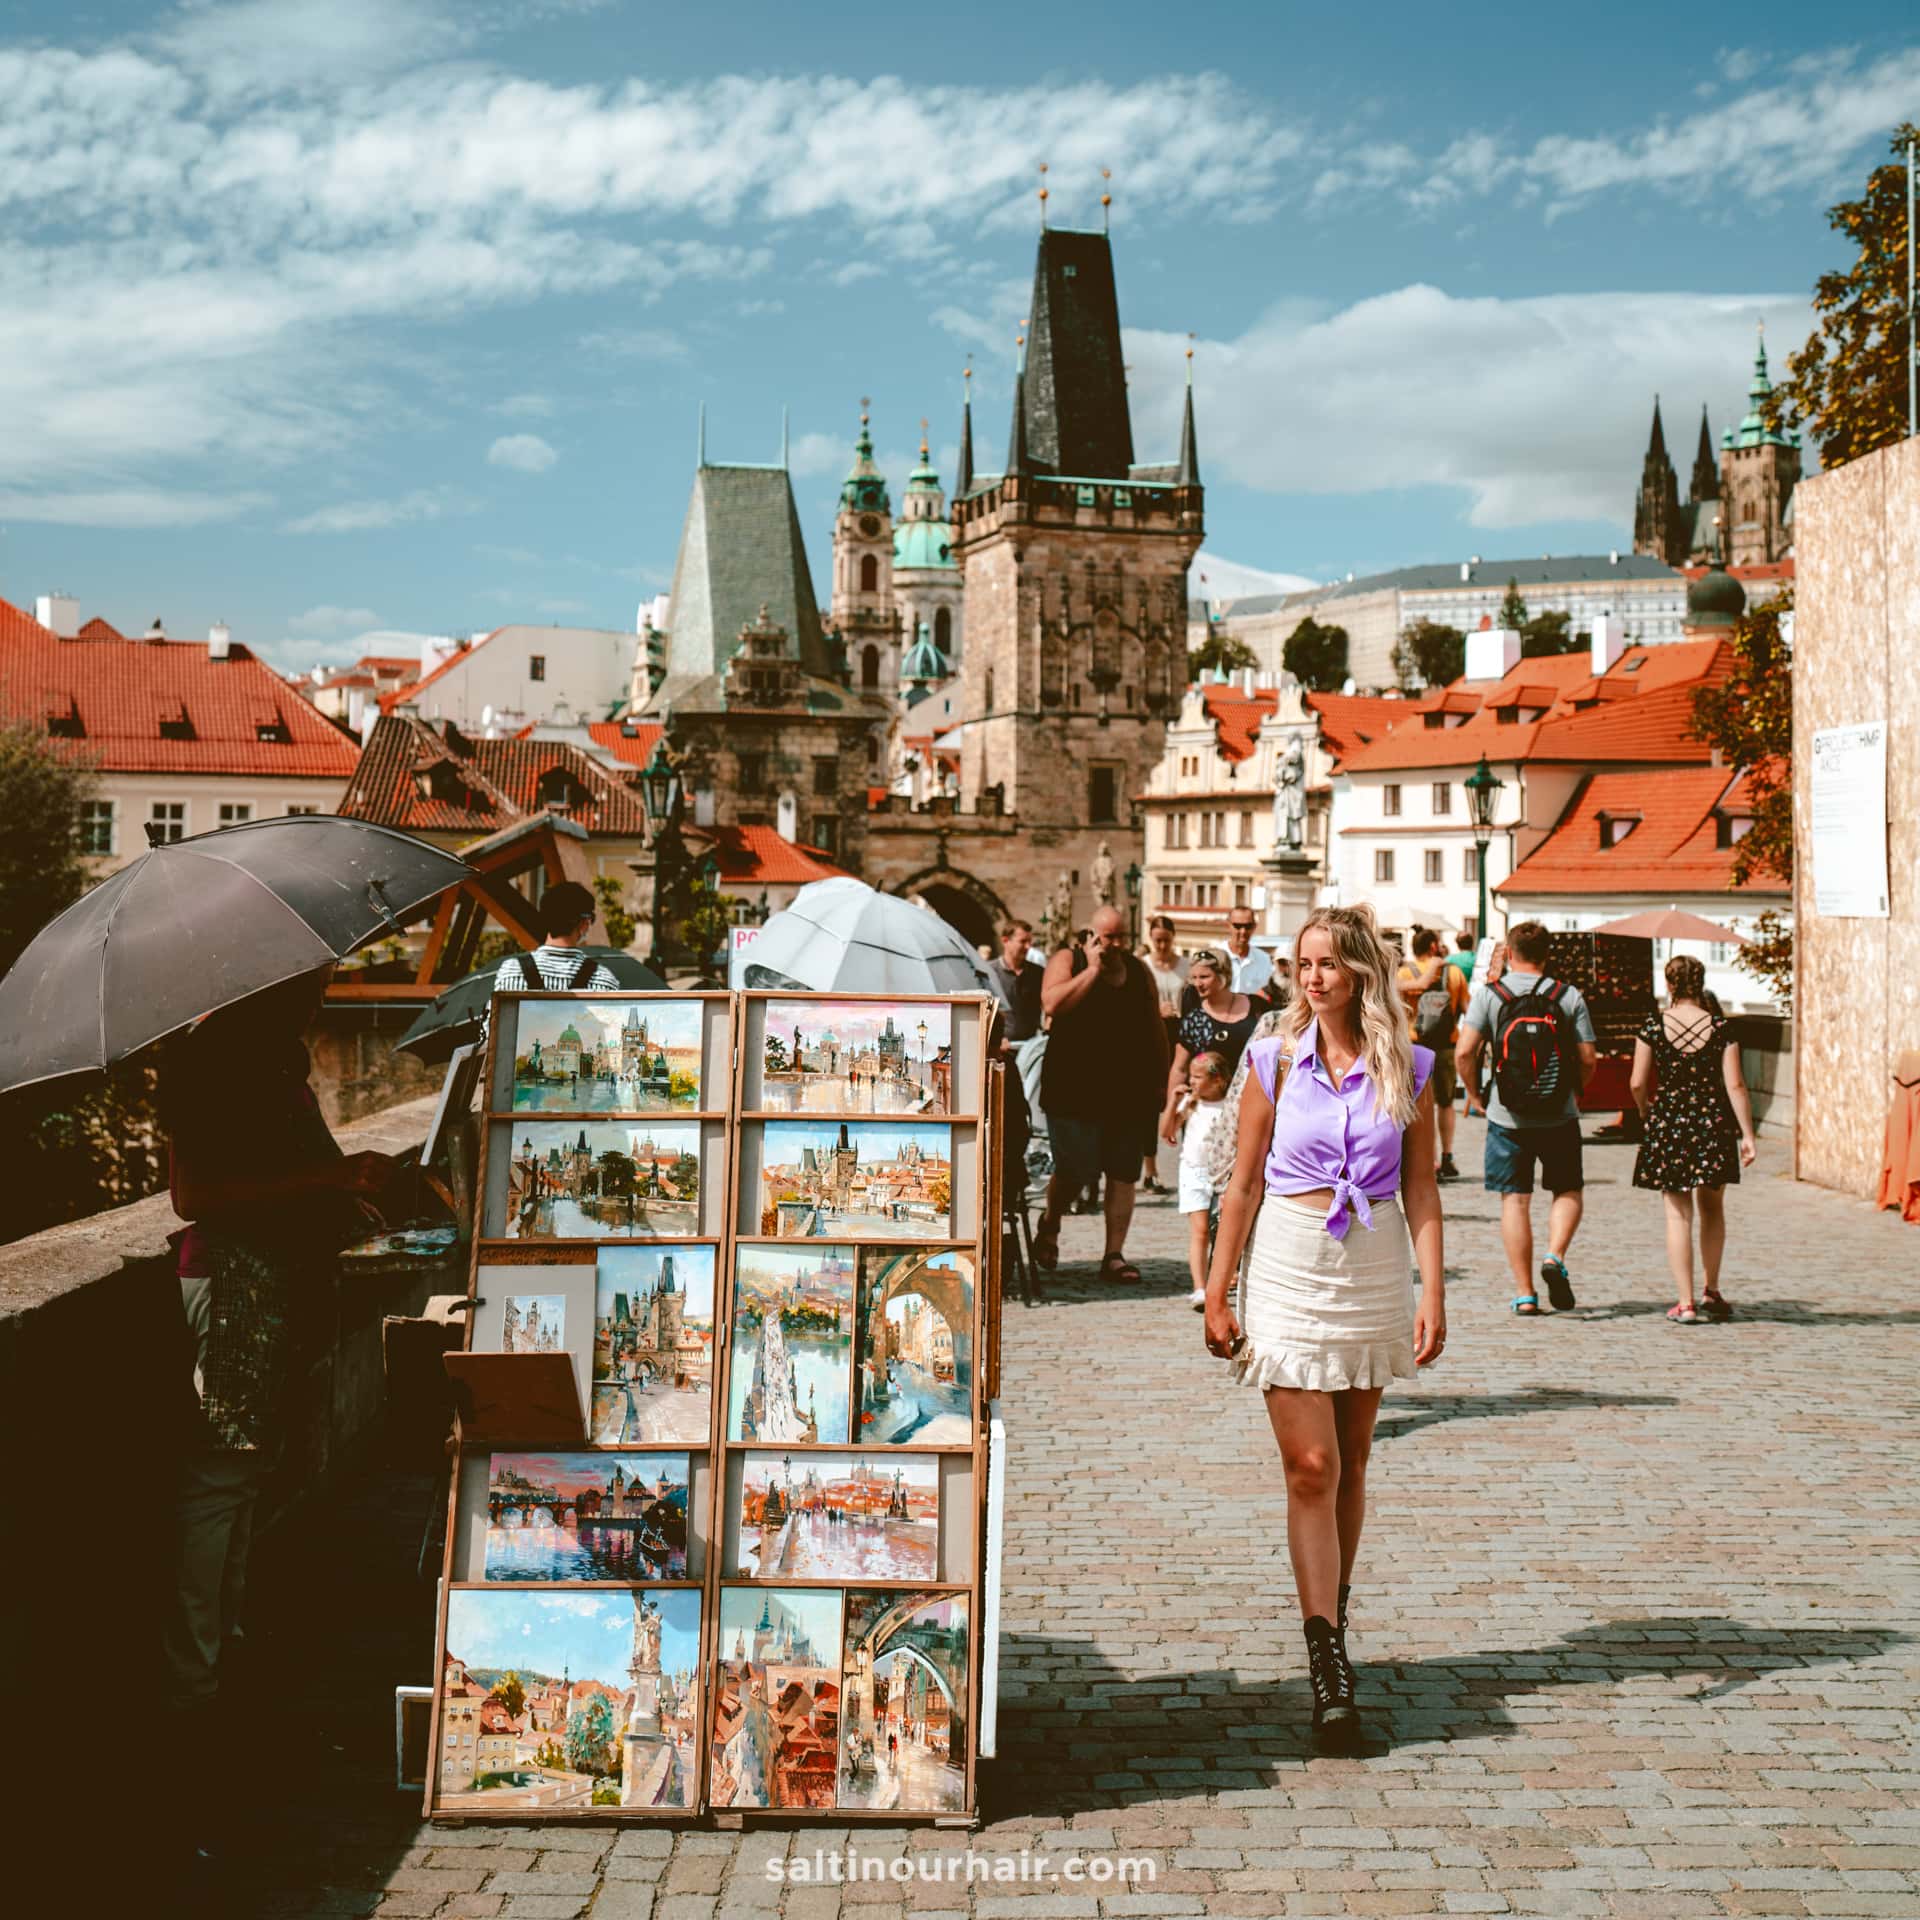 12 Things To Do in Prague (2023 Travel Guide) · Salt in our Hair